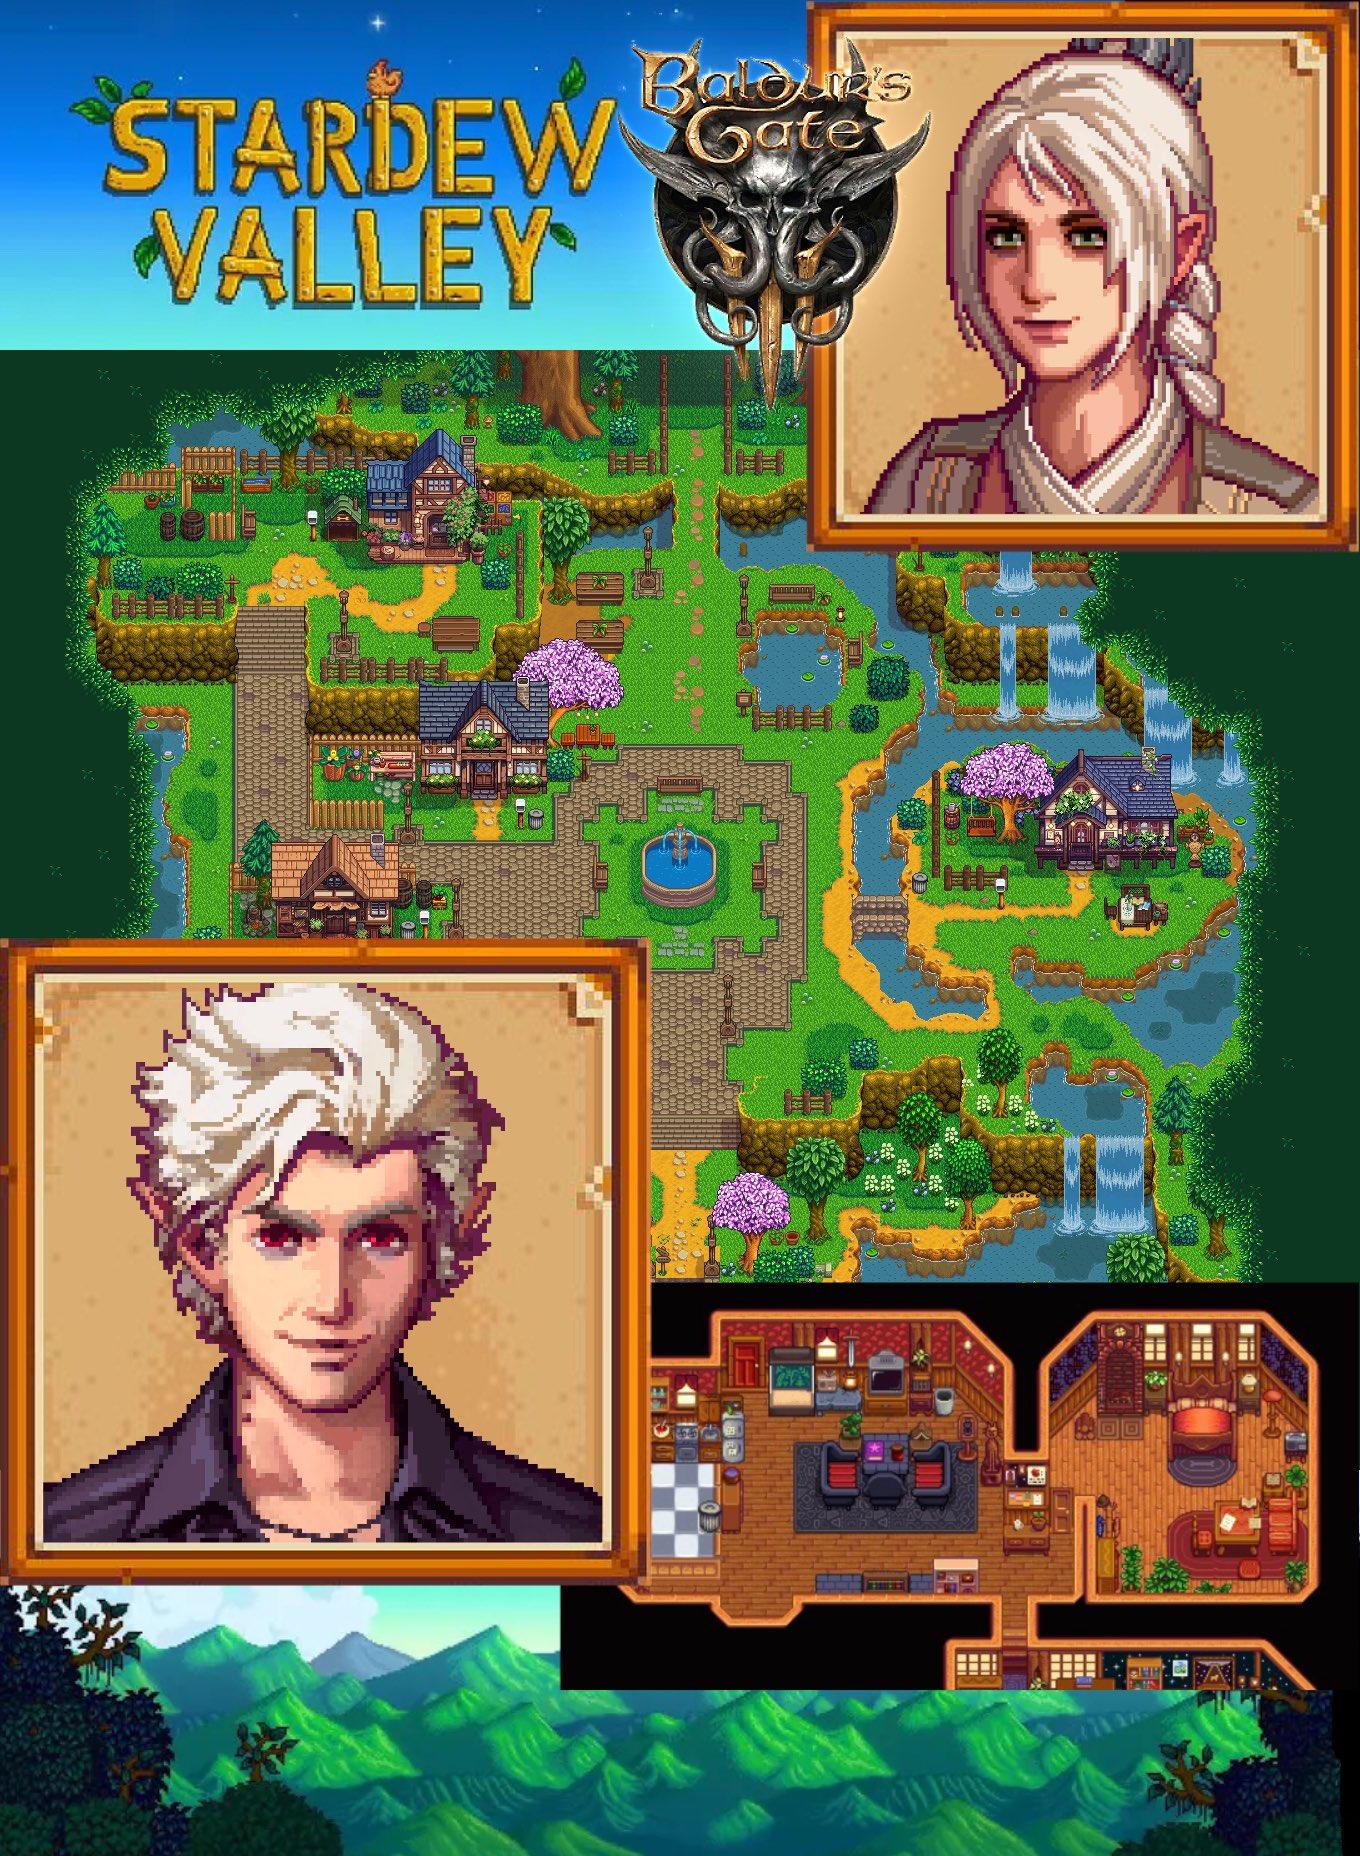 Planned Stardew Valley Mod Will Introduce Baldur's Gate 3 Characters